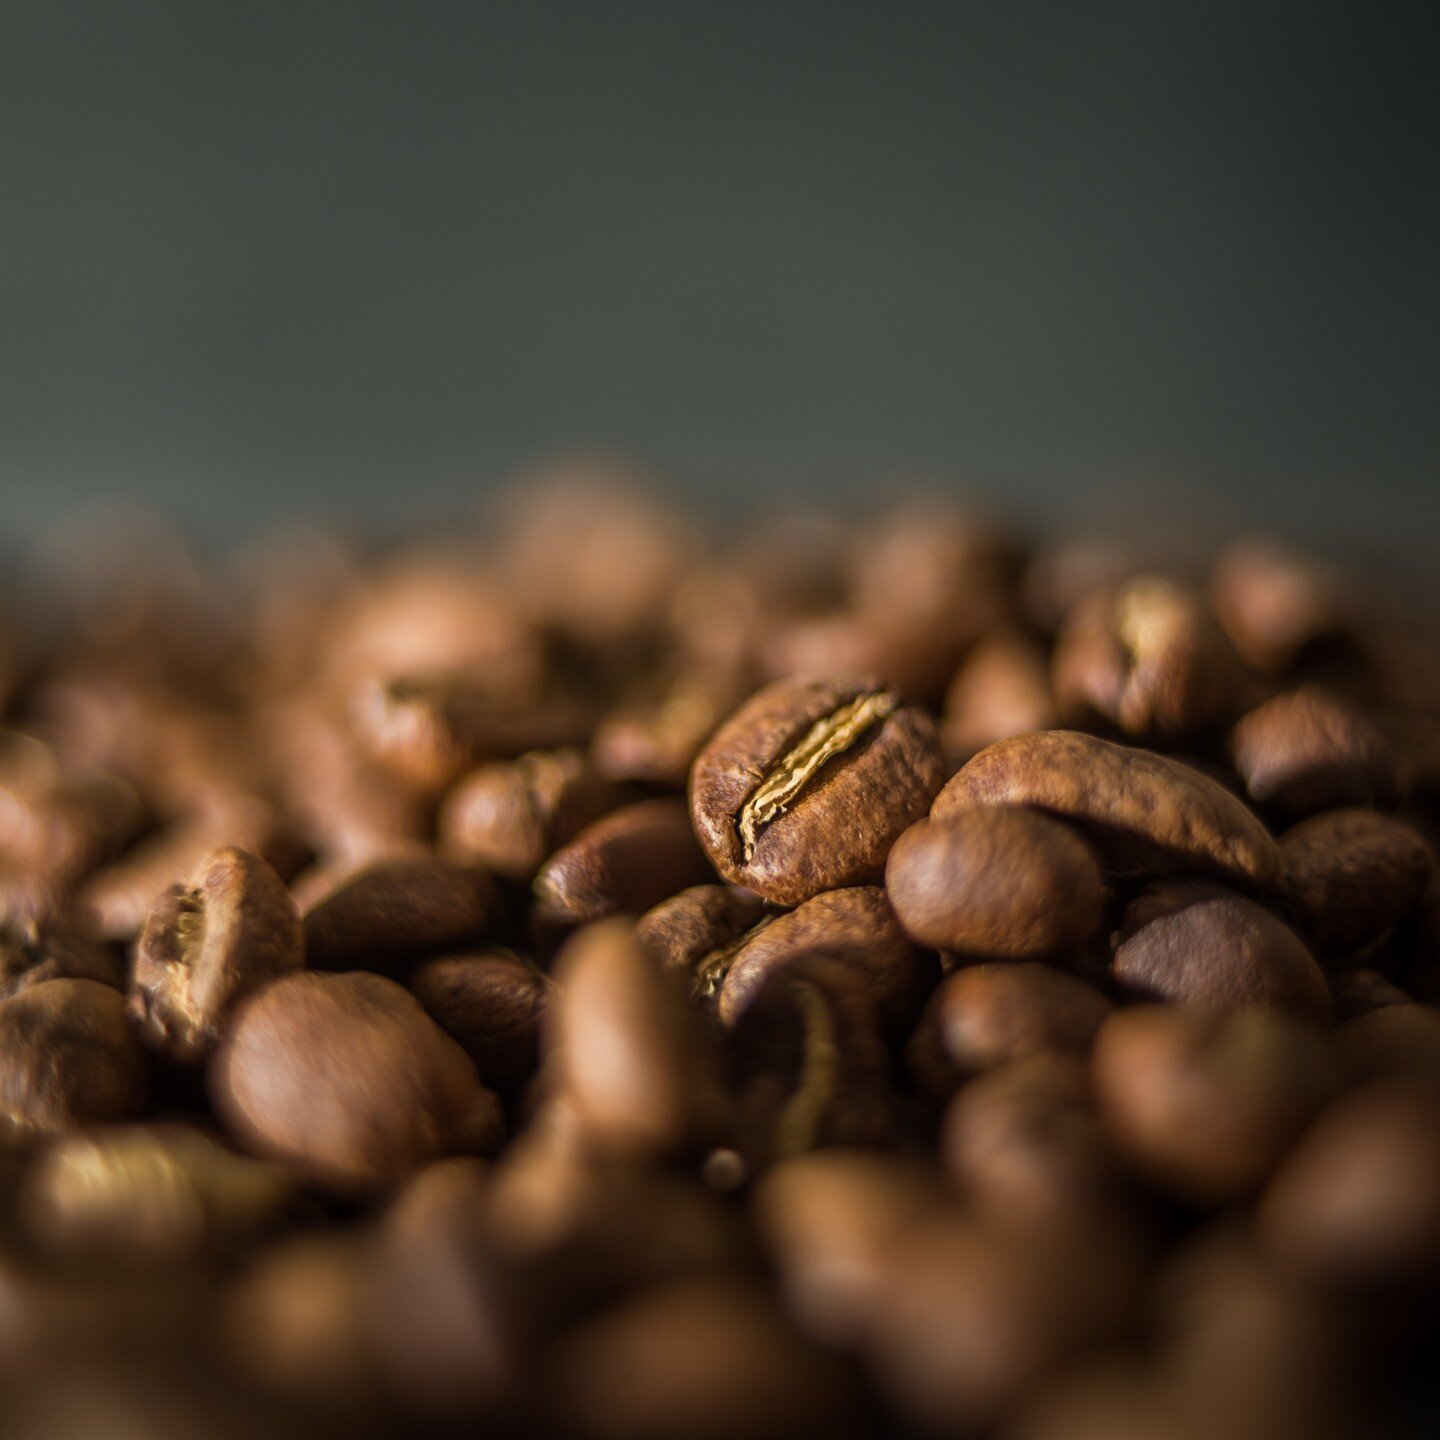 Hey everyone! We're going to take the time to answer some questions on our values, our coffees, and how Whiptail works. First up: how do we choose the coffees we roast? 

When we are ready for a new coffee in our lineup, we request samples from impor